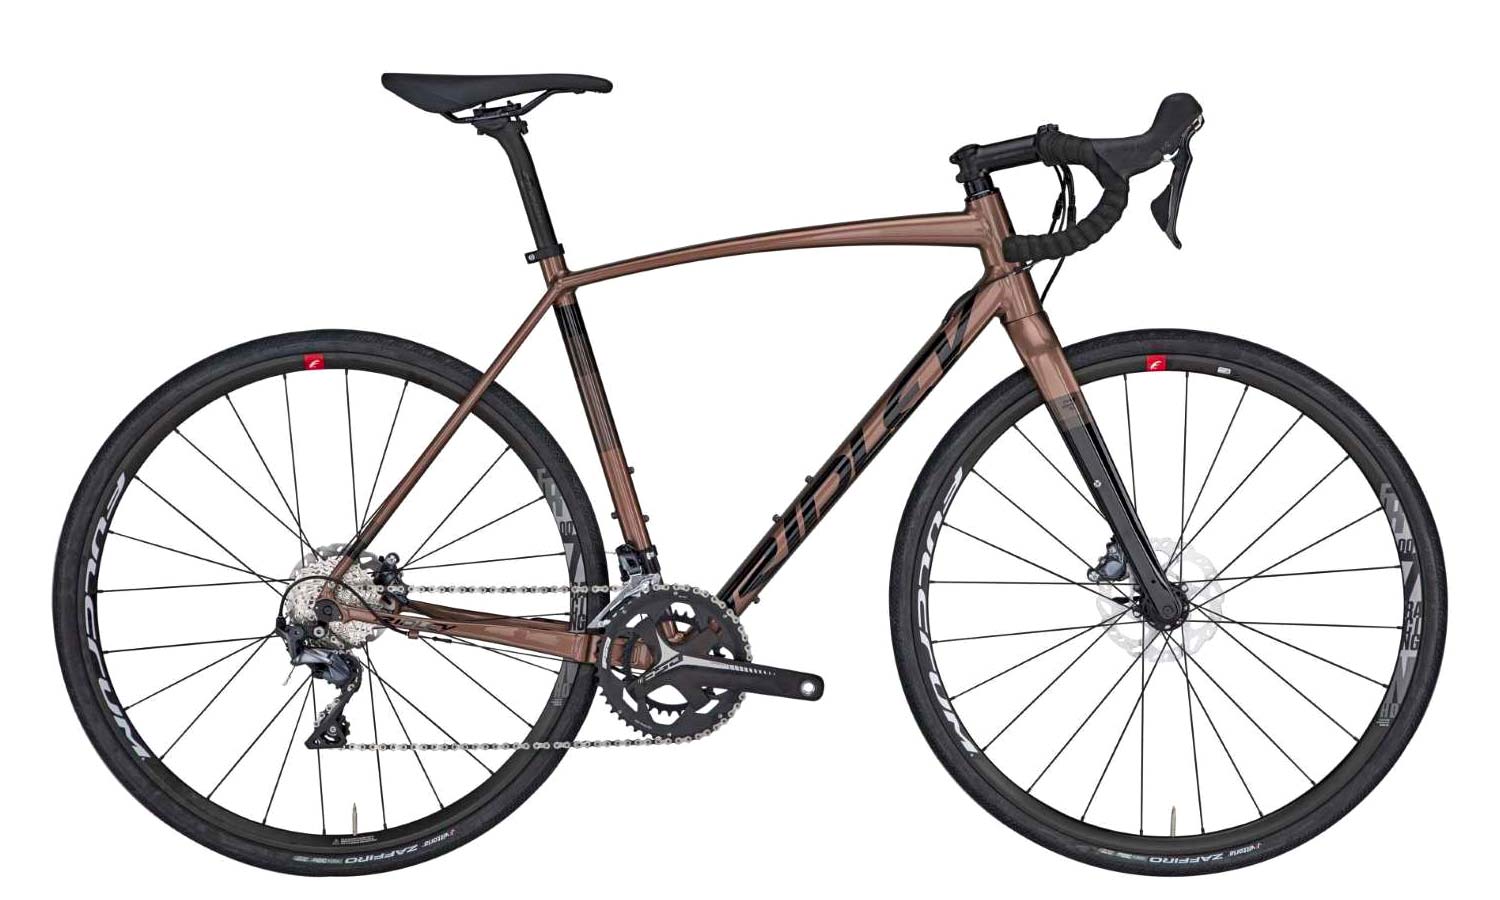 2020 Kanzo A affordable alloy gravel bike